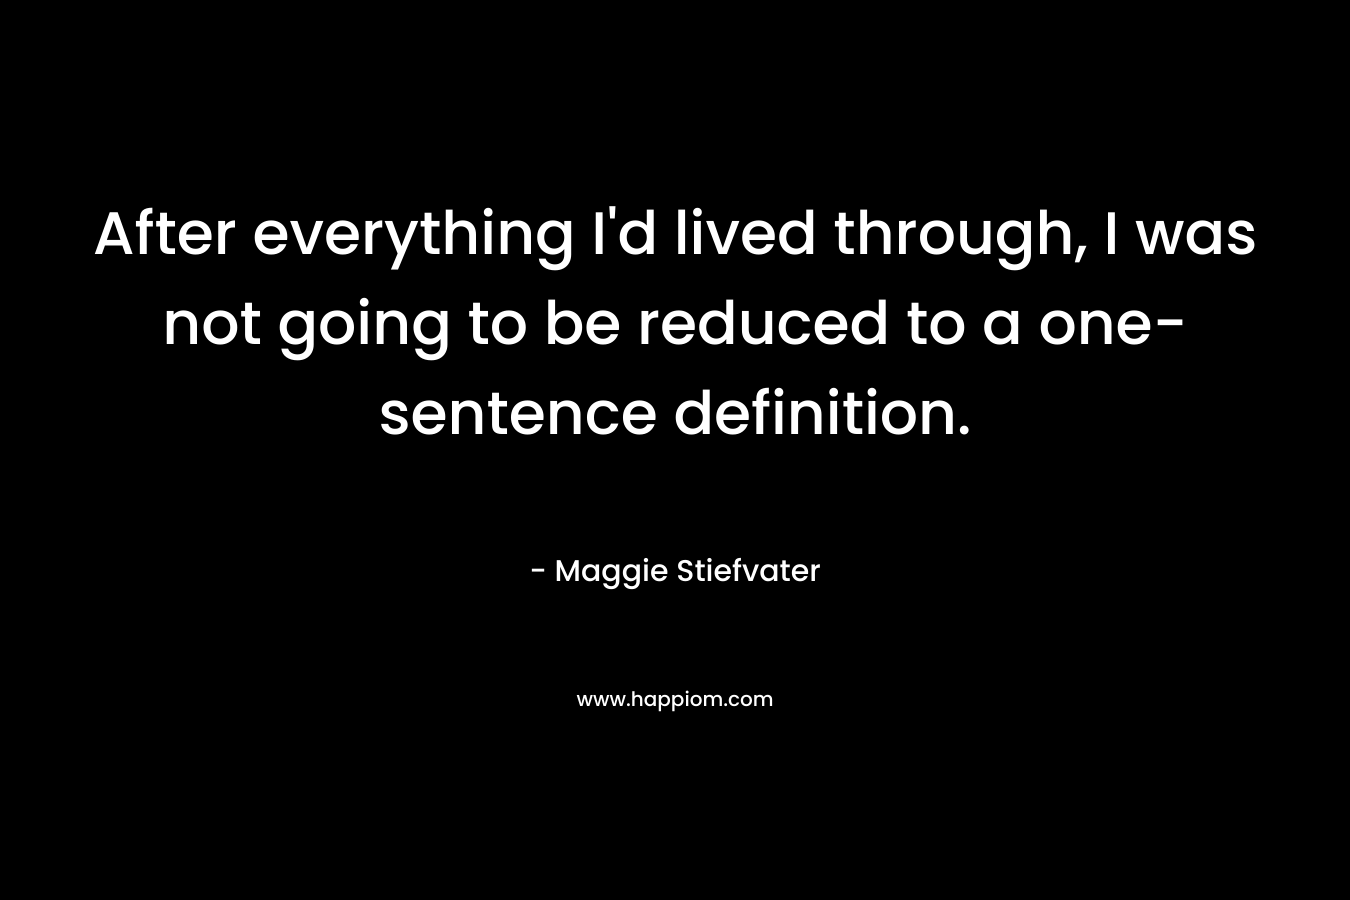 After everything I’d lived through, I was not going to be reduced to a one-sentence definition. – Maggie Stiefvater